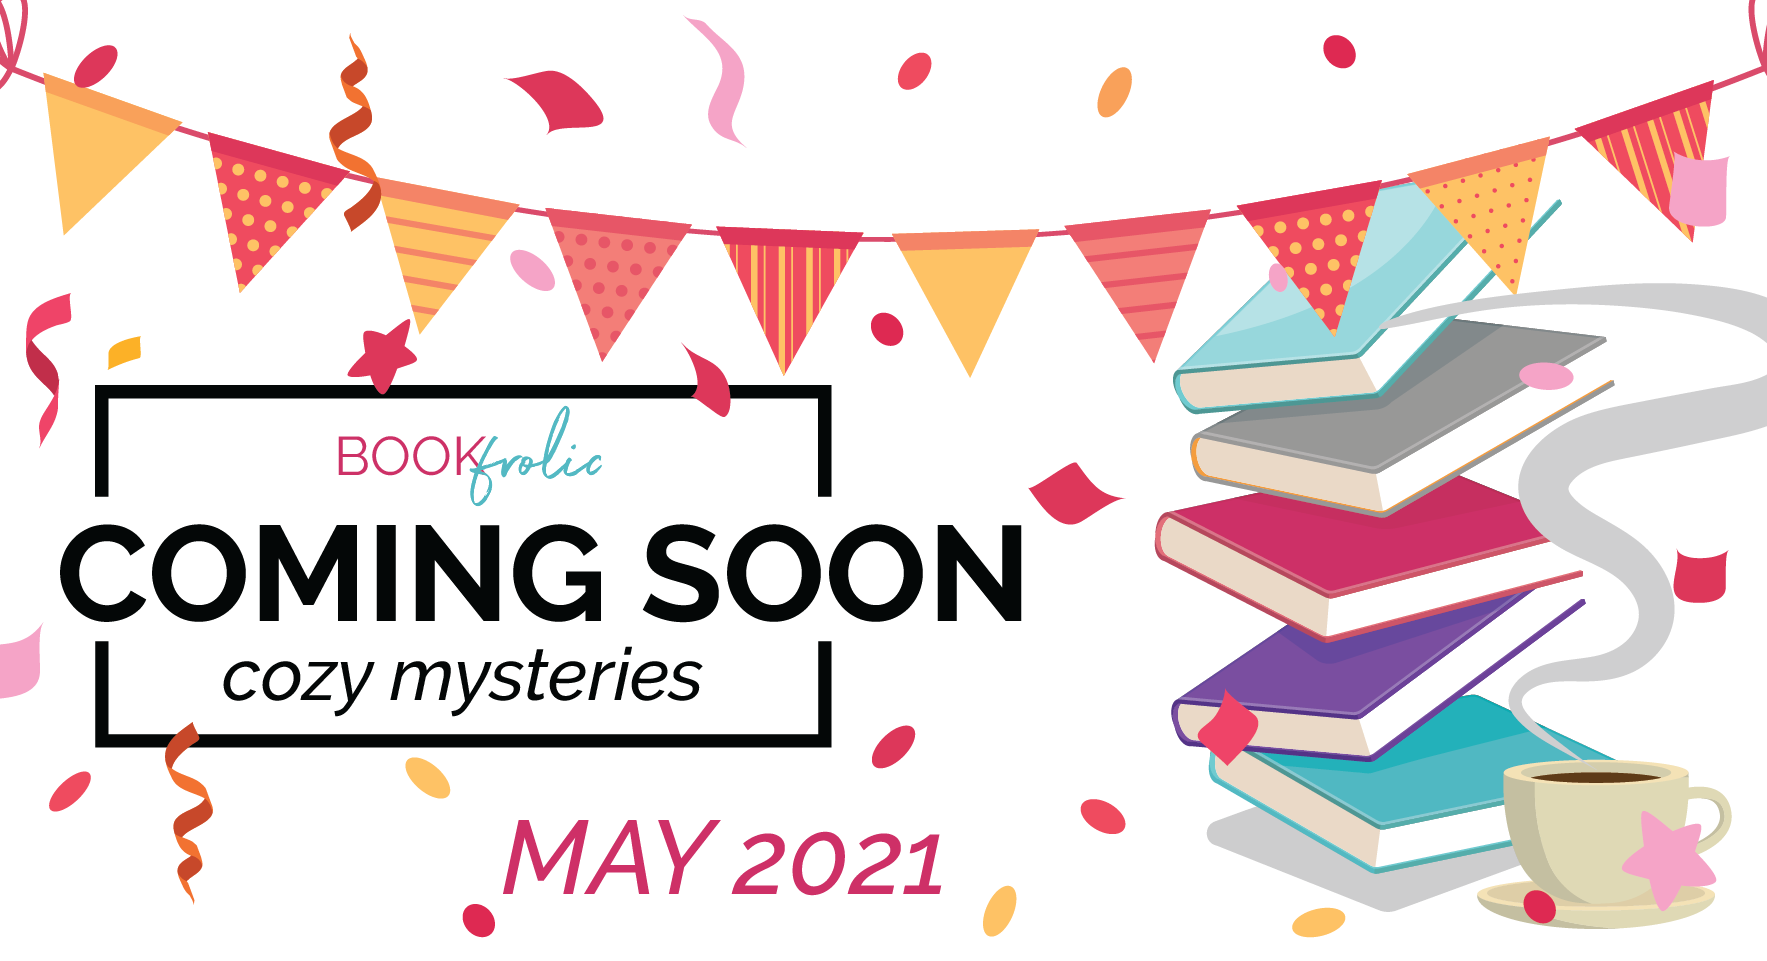 Coming soon - cozy mystery new releases for May 2021